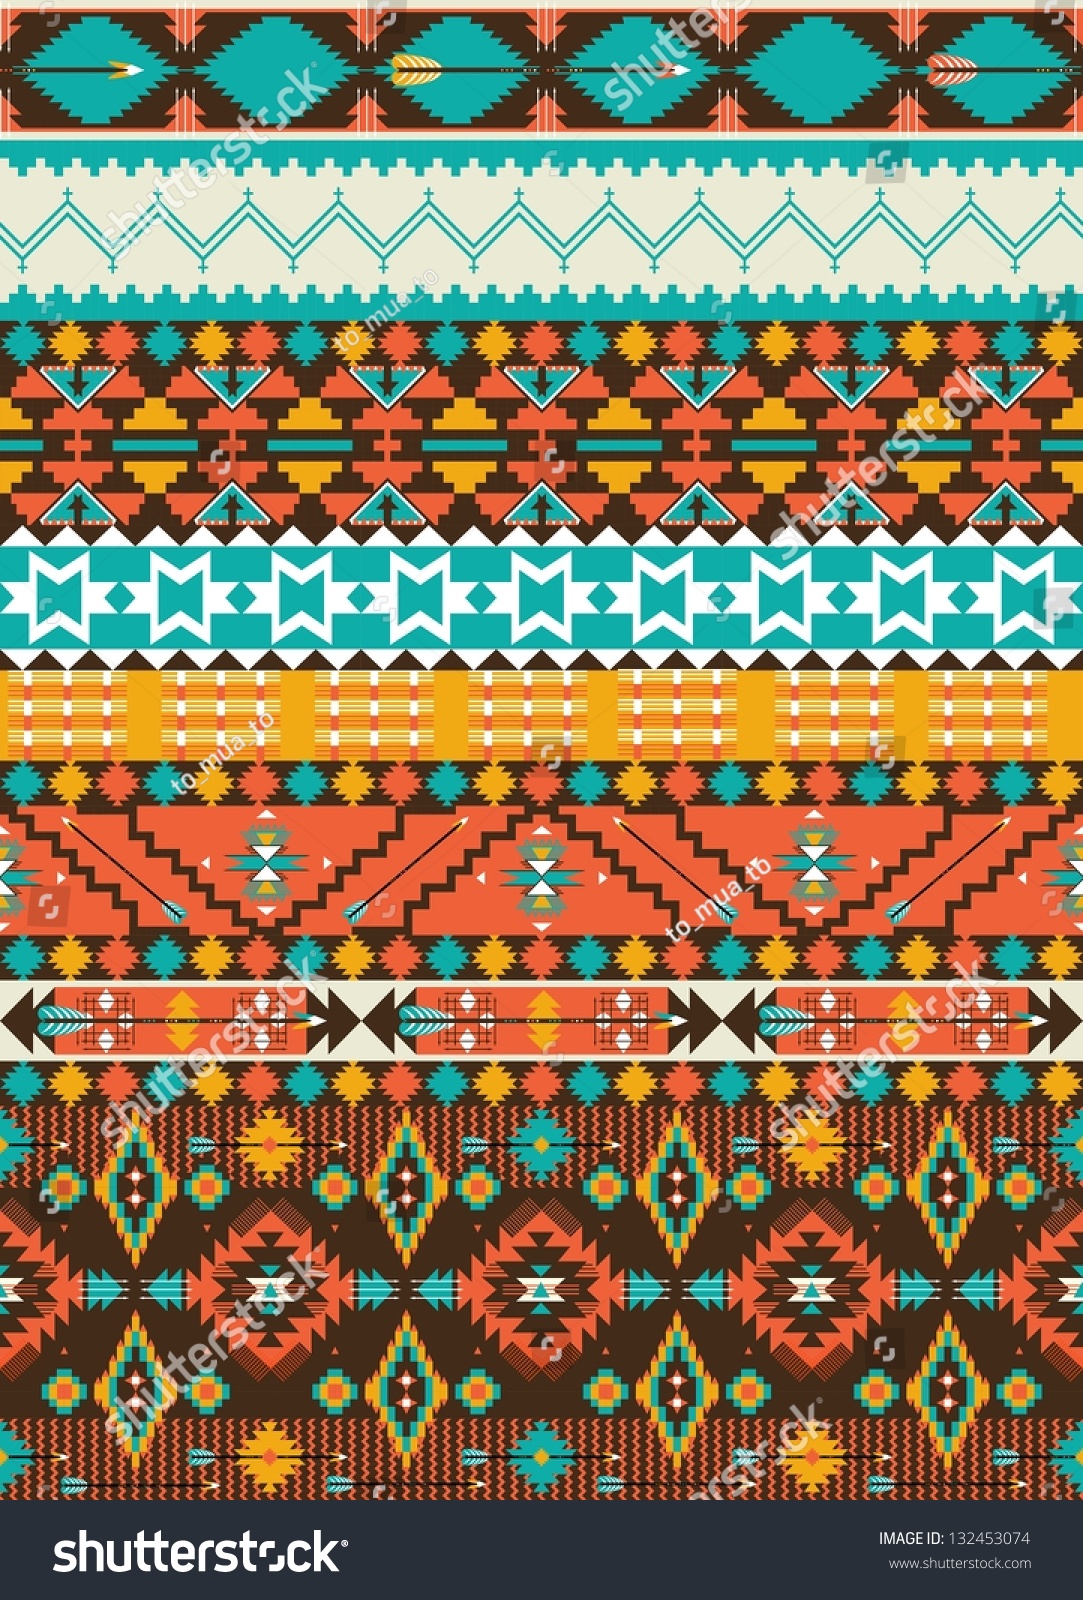 Seamless Colorful Aztec Pattern Stock Vector Illustration 132453074 ...